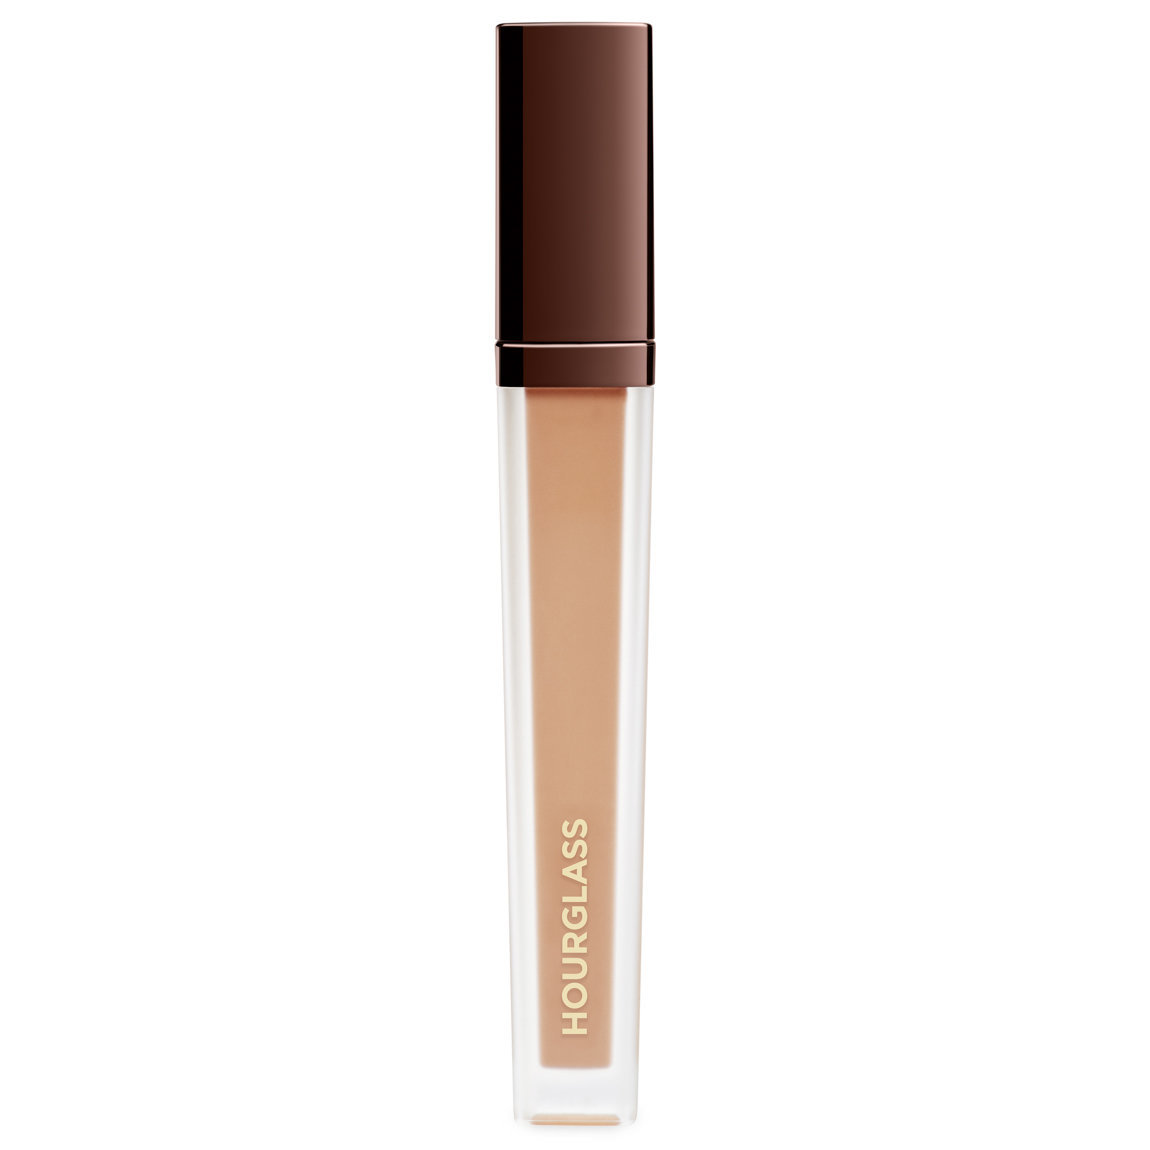 Hourglass Vanish Airbrush Concealer Apricot alternative view 1 - product swatch.